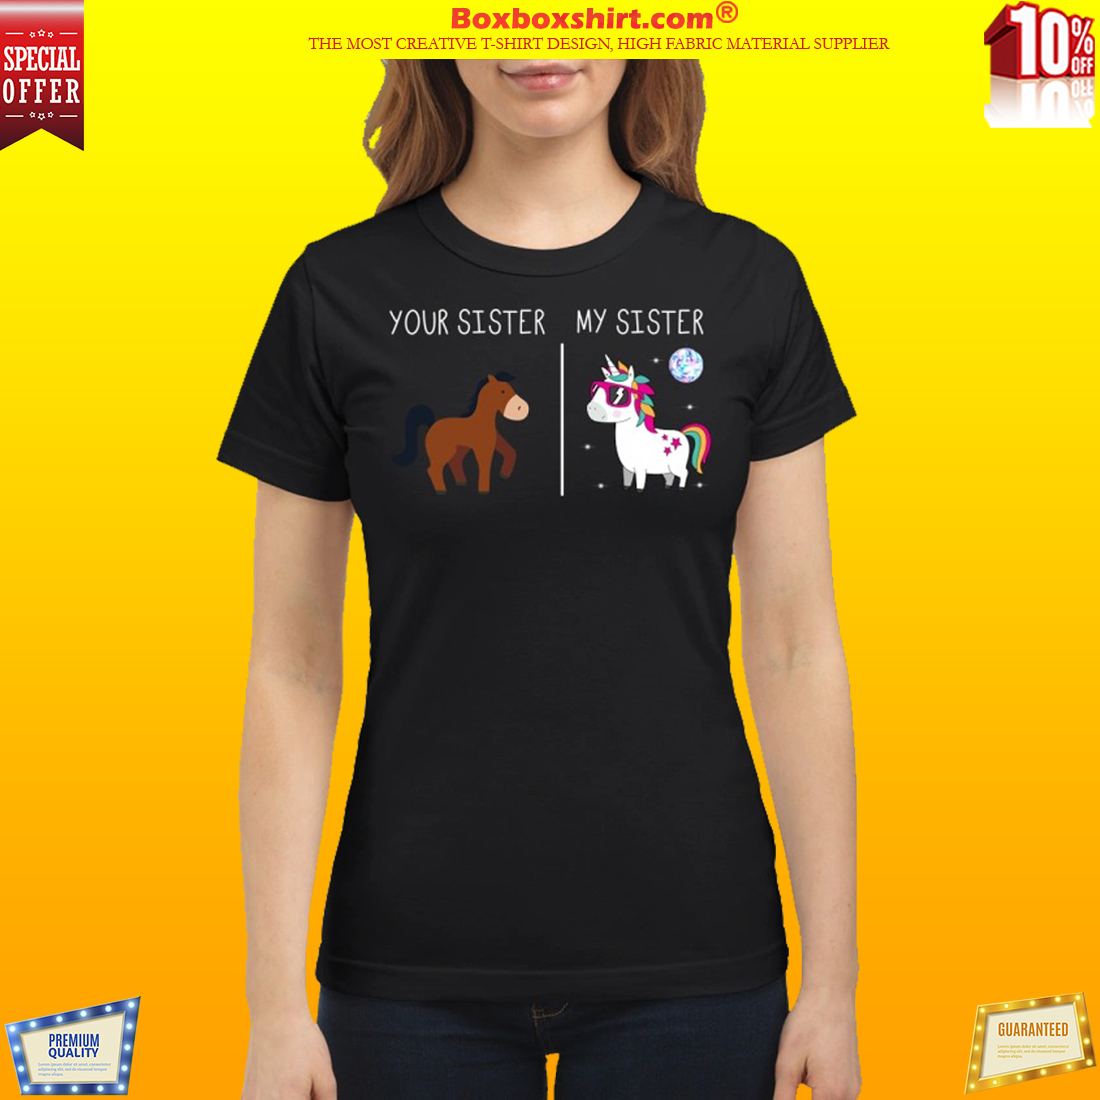 Your sister horse my sister unicorn shirt